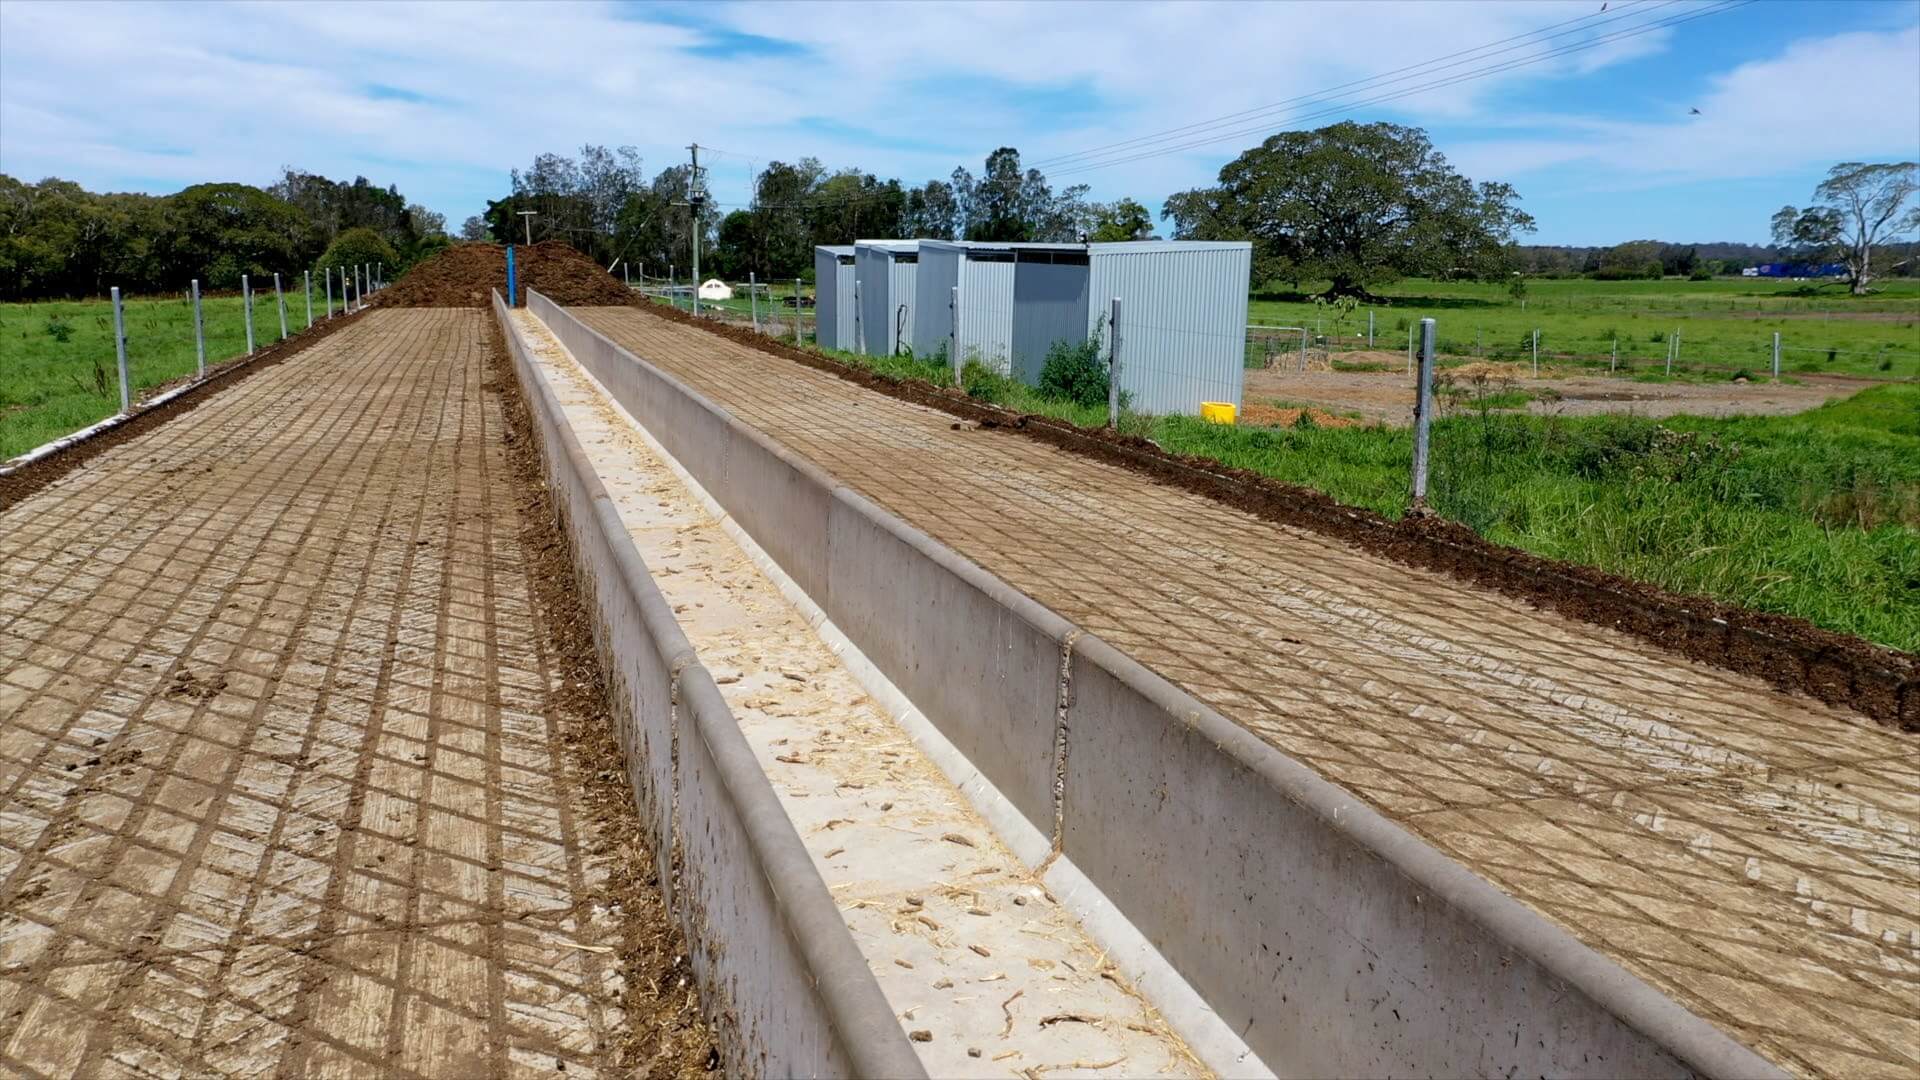 Long concrete feed pad which is separated in two parts with a feeding trough in the middle